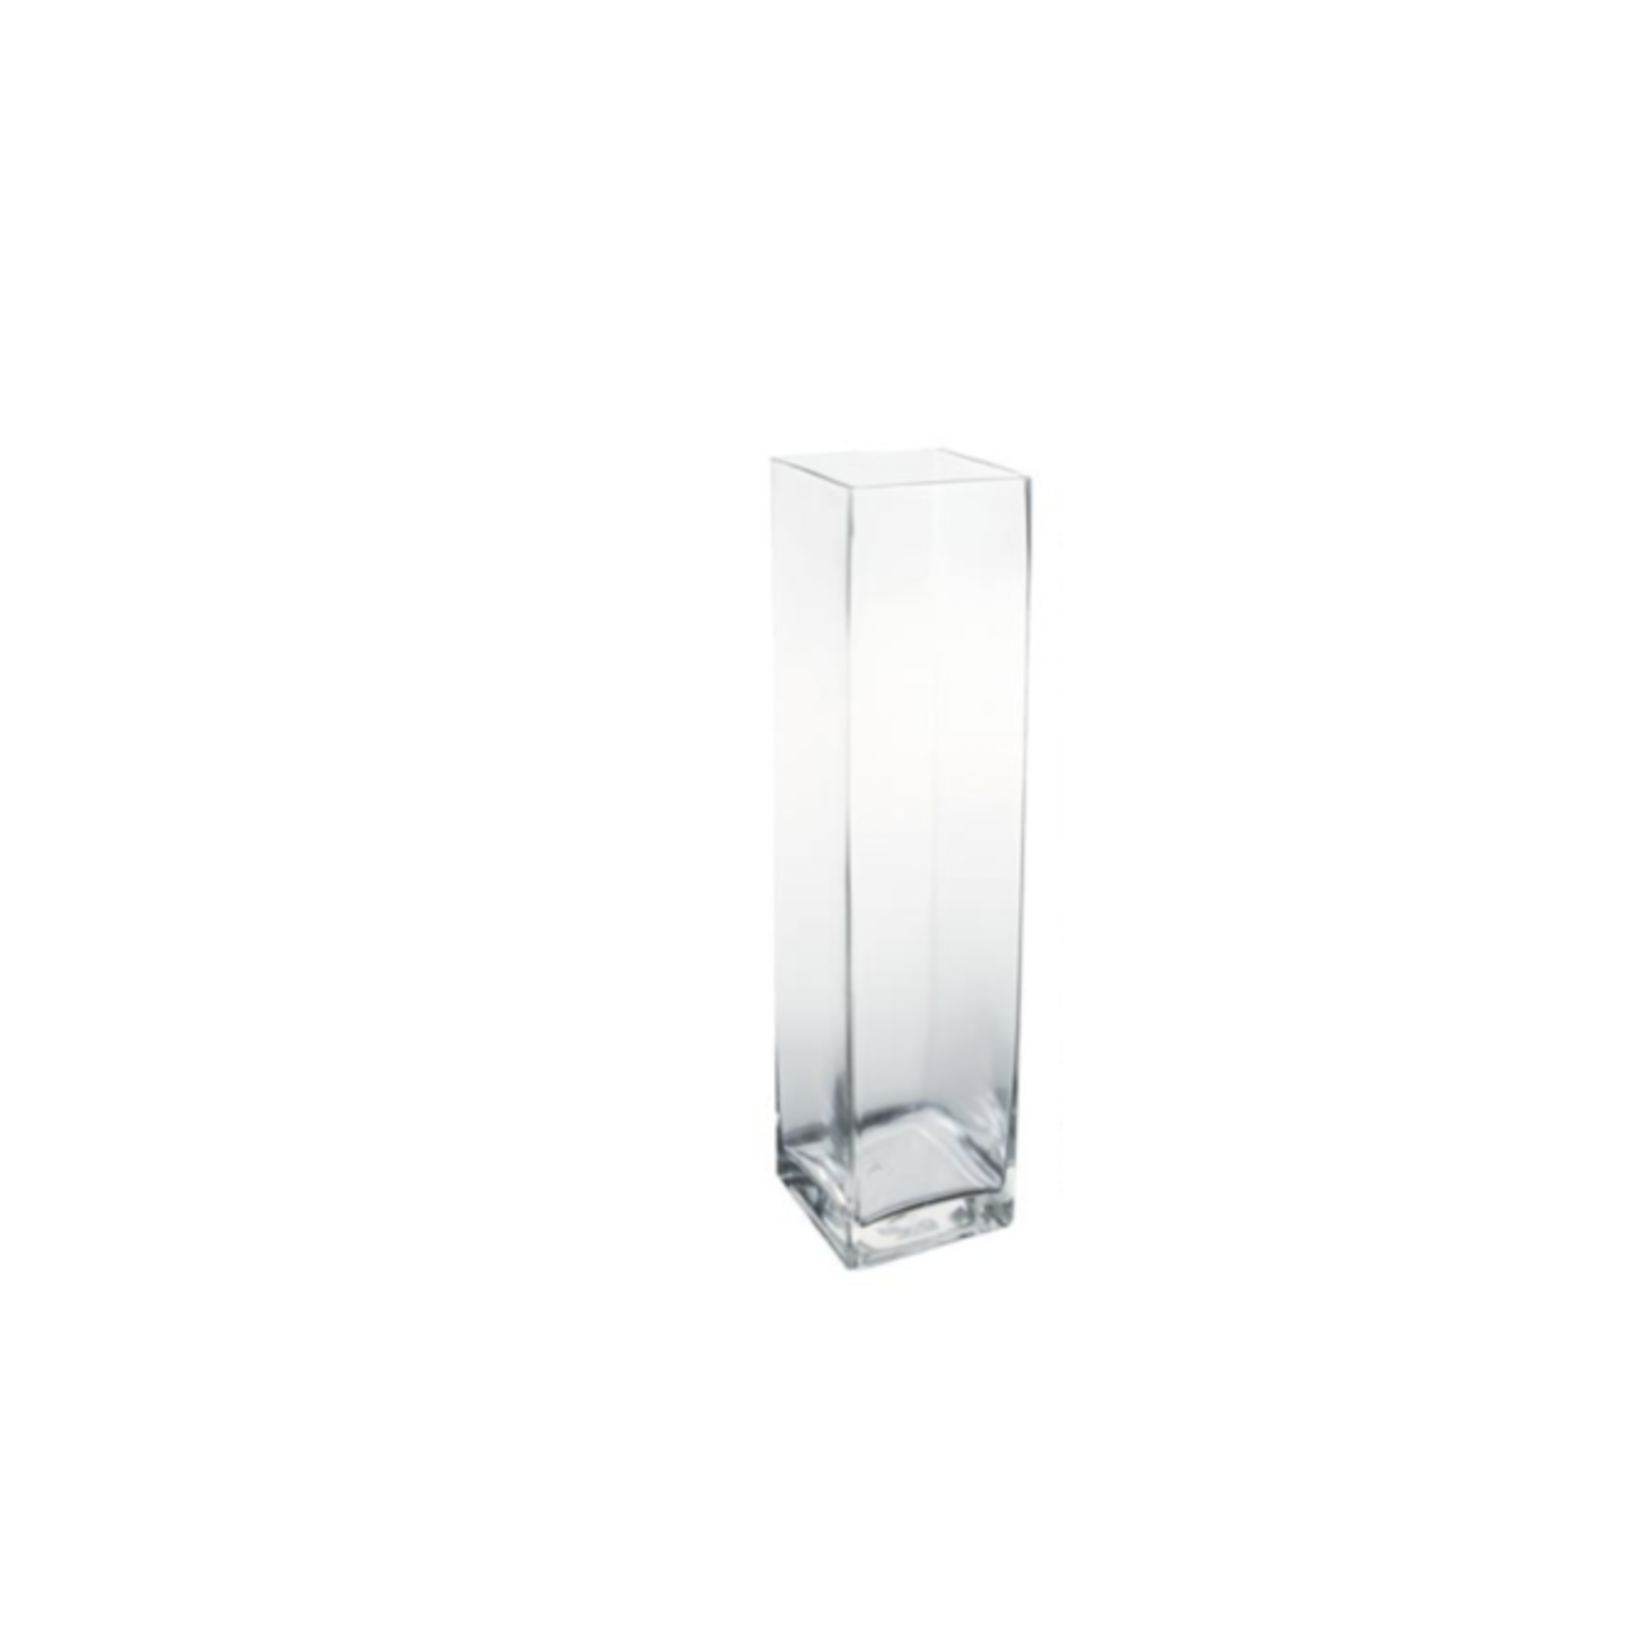 6"h x 4" x 4" CLEAR GLASS SQUARE OPENING